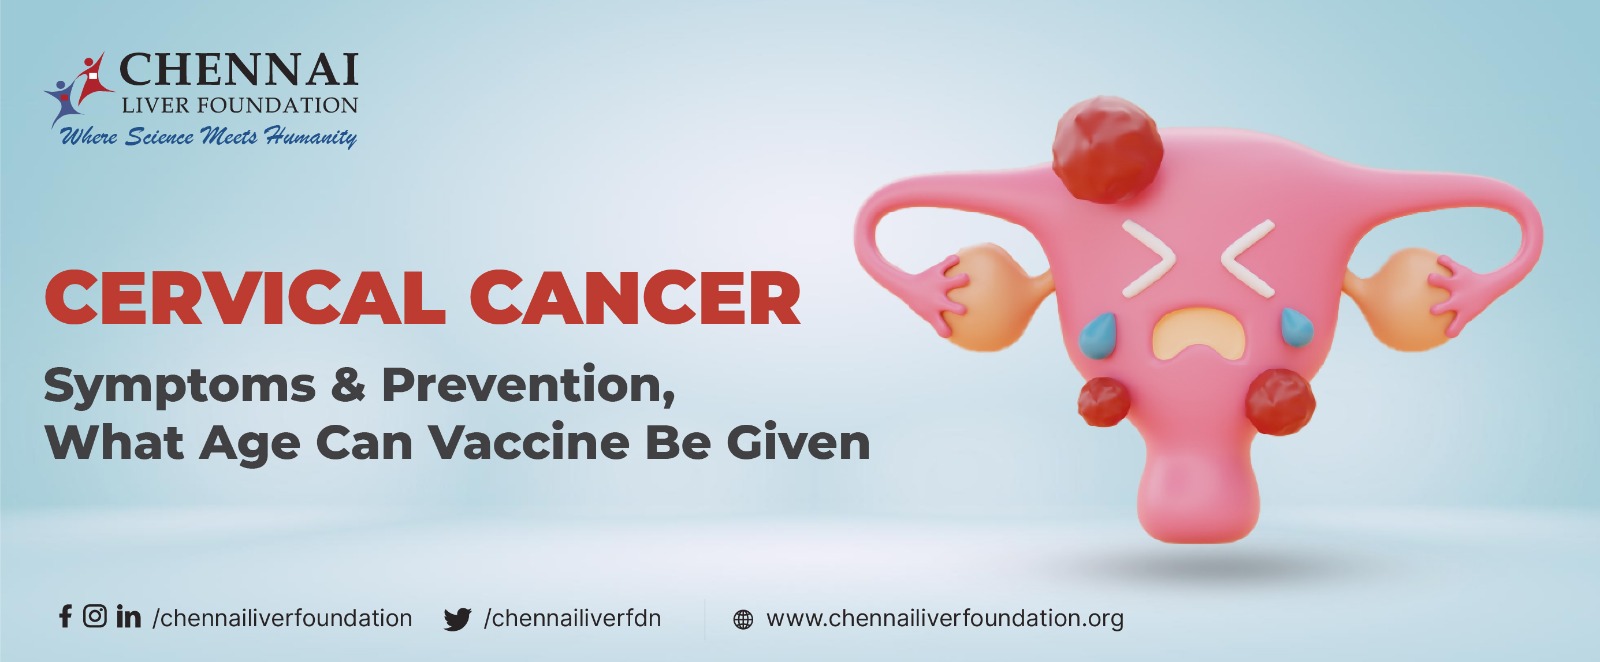 Cervical Cancer – Symptoms & Prevention, What Age Can Vaccine Be Given